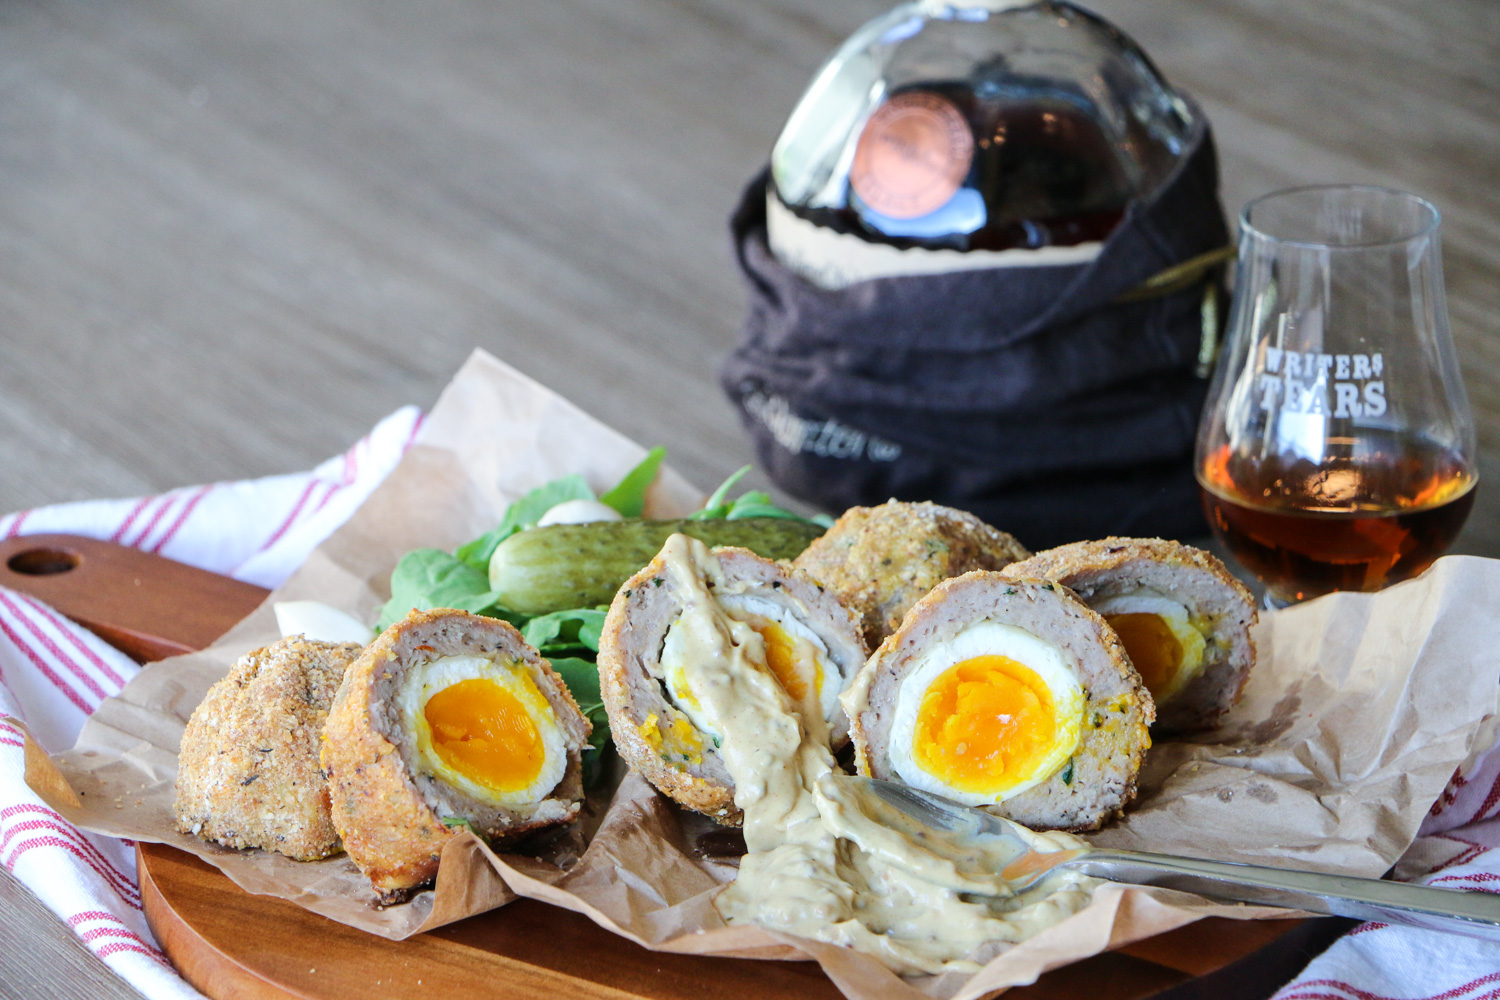 Scotch eggs with pickles and a drink of Scotch